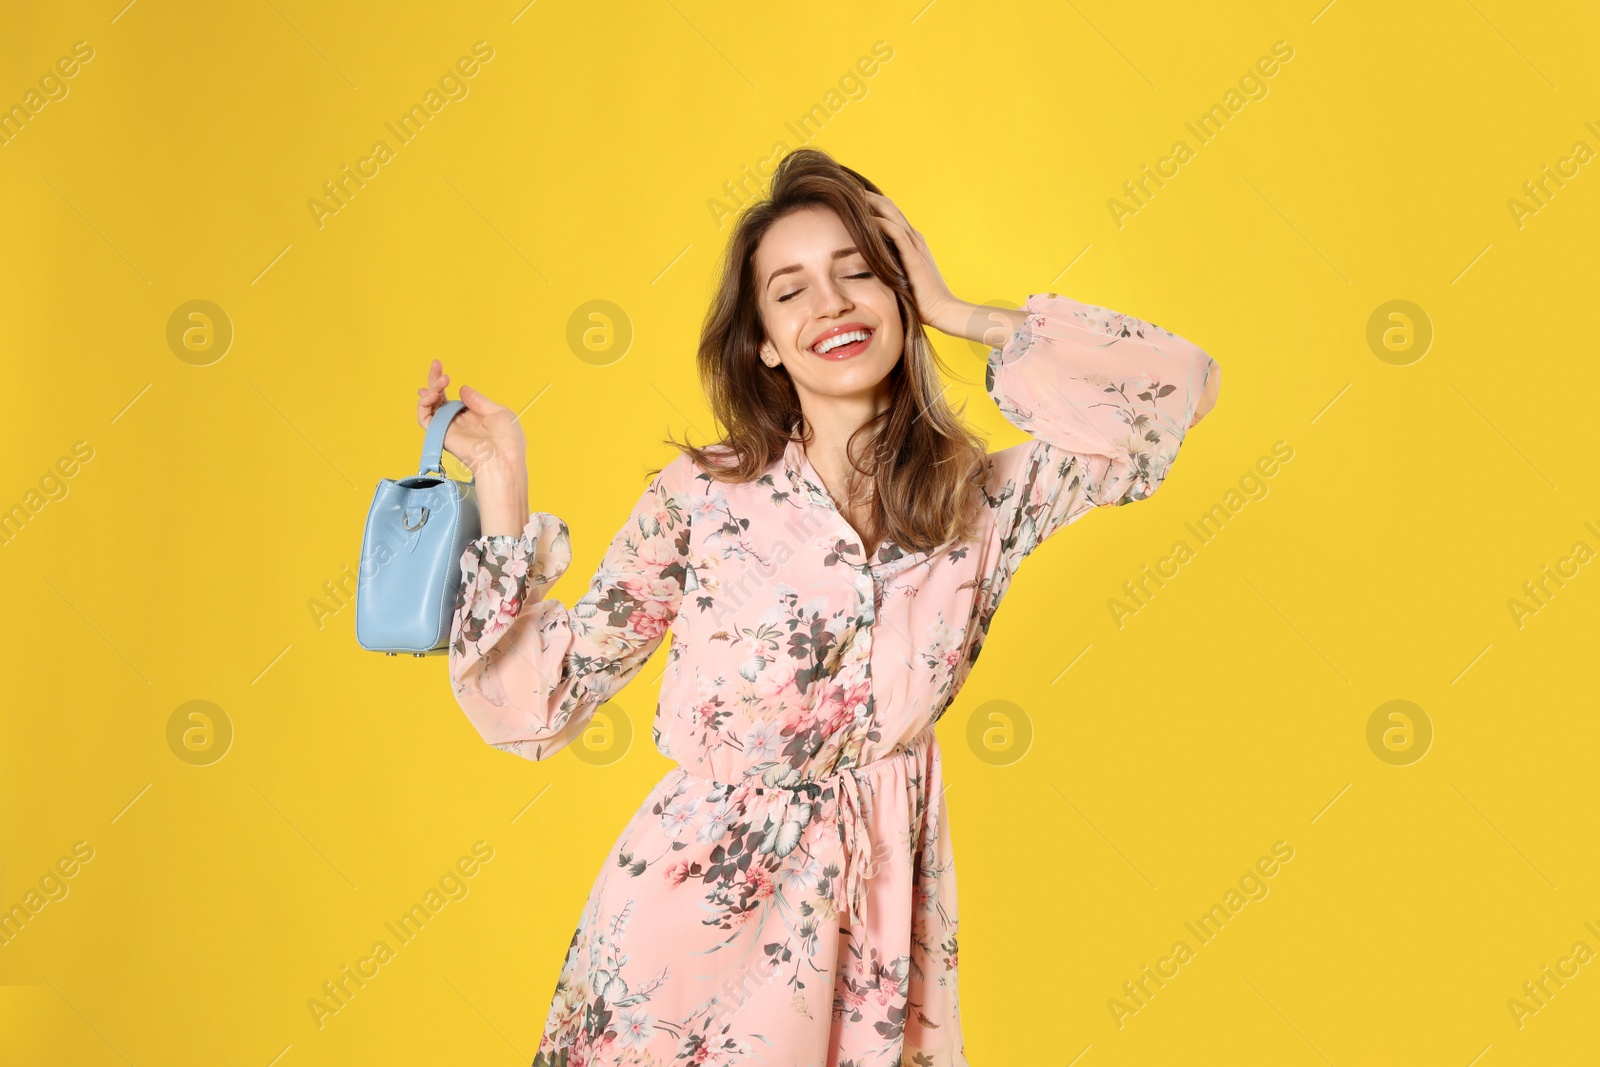 Photo of Young woman wearing floral print dress with stylish handbag on yellow background